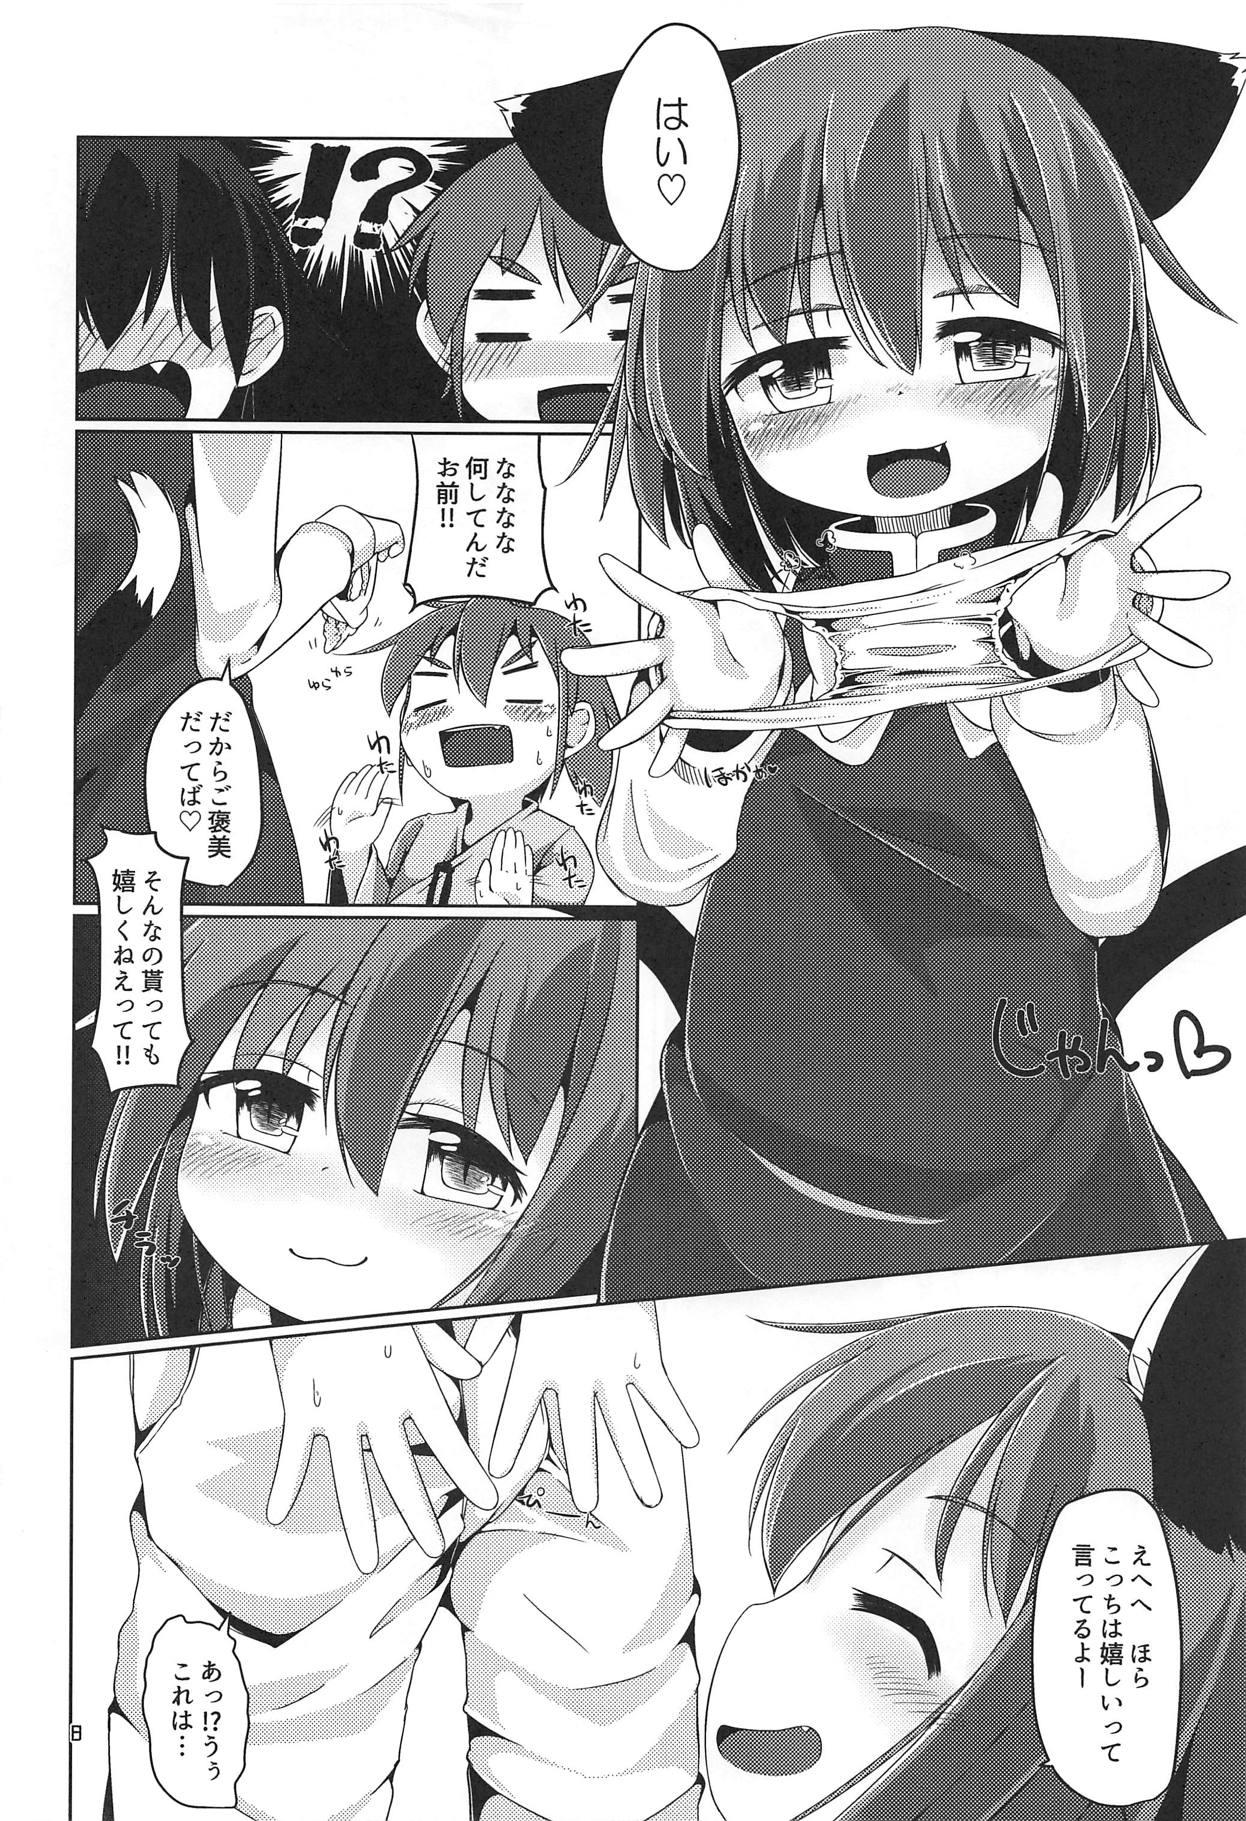 Ginger Neko Nee-chan. - Touhou project Pervs - Page 7